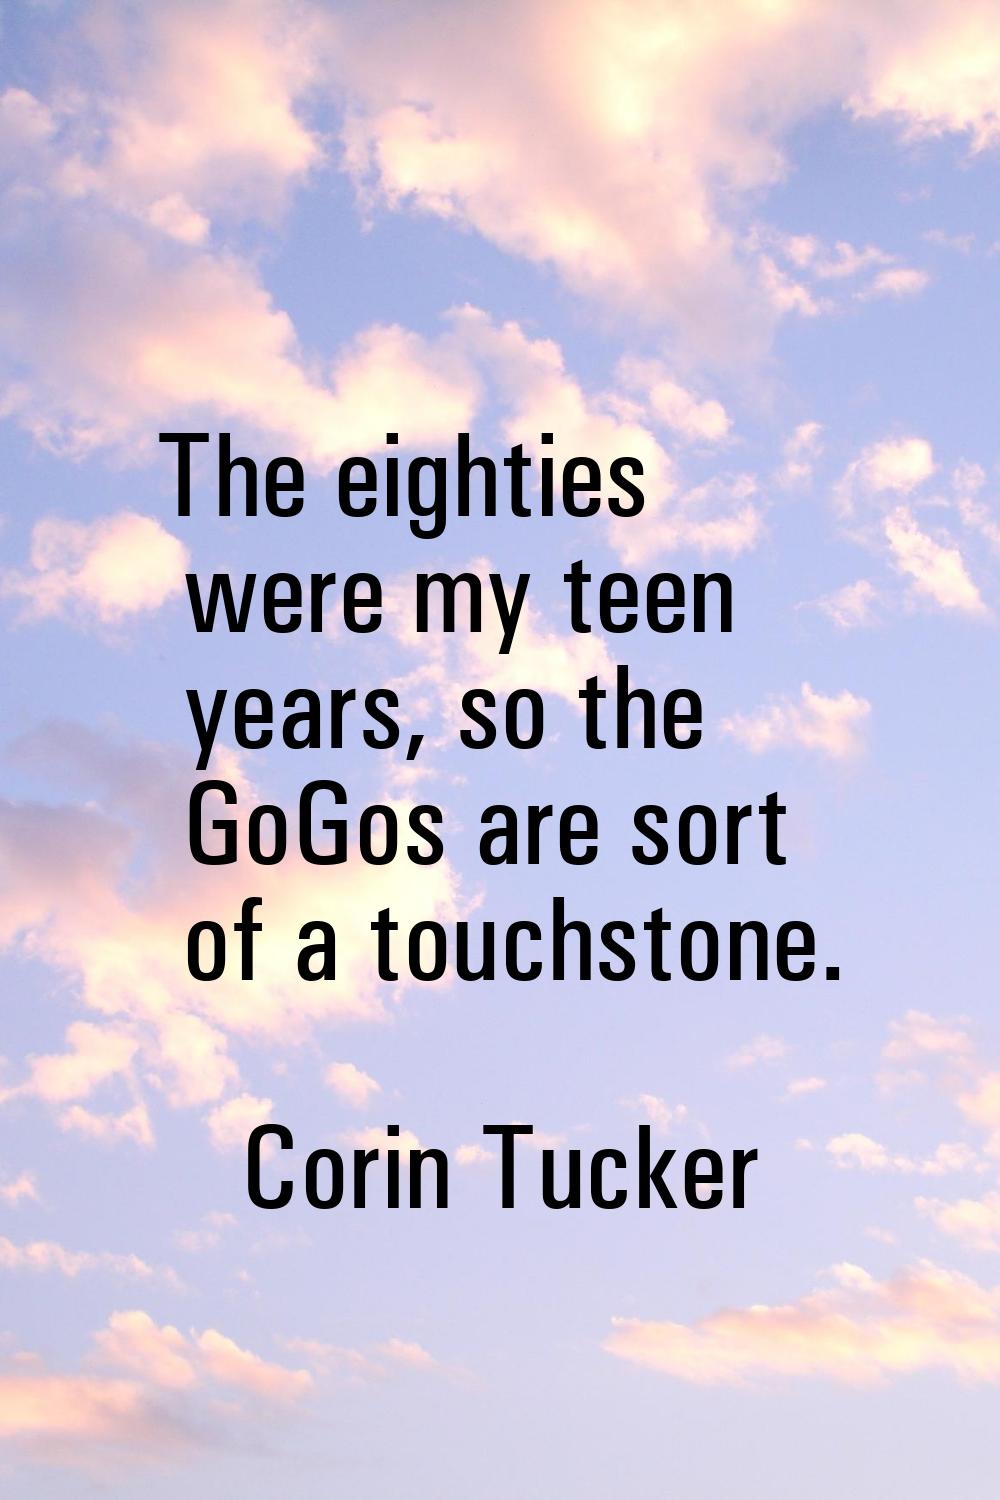 The eighties were my teen years, so the GoGos are sort of a touchstone.